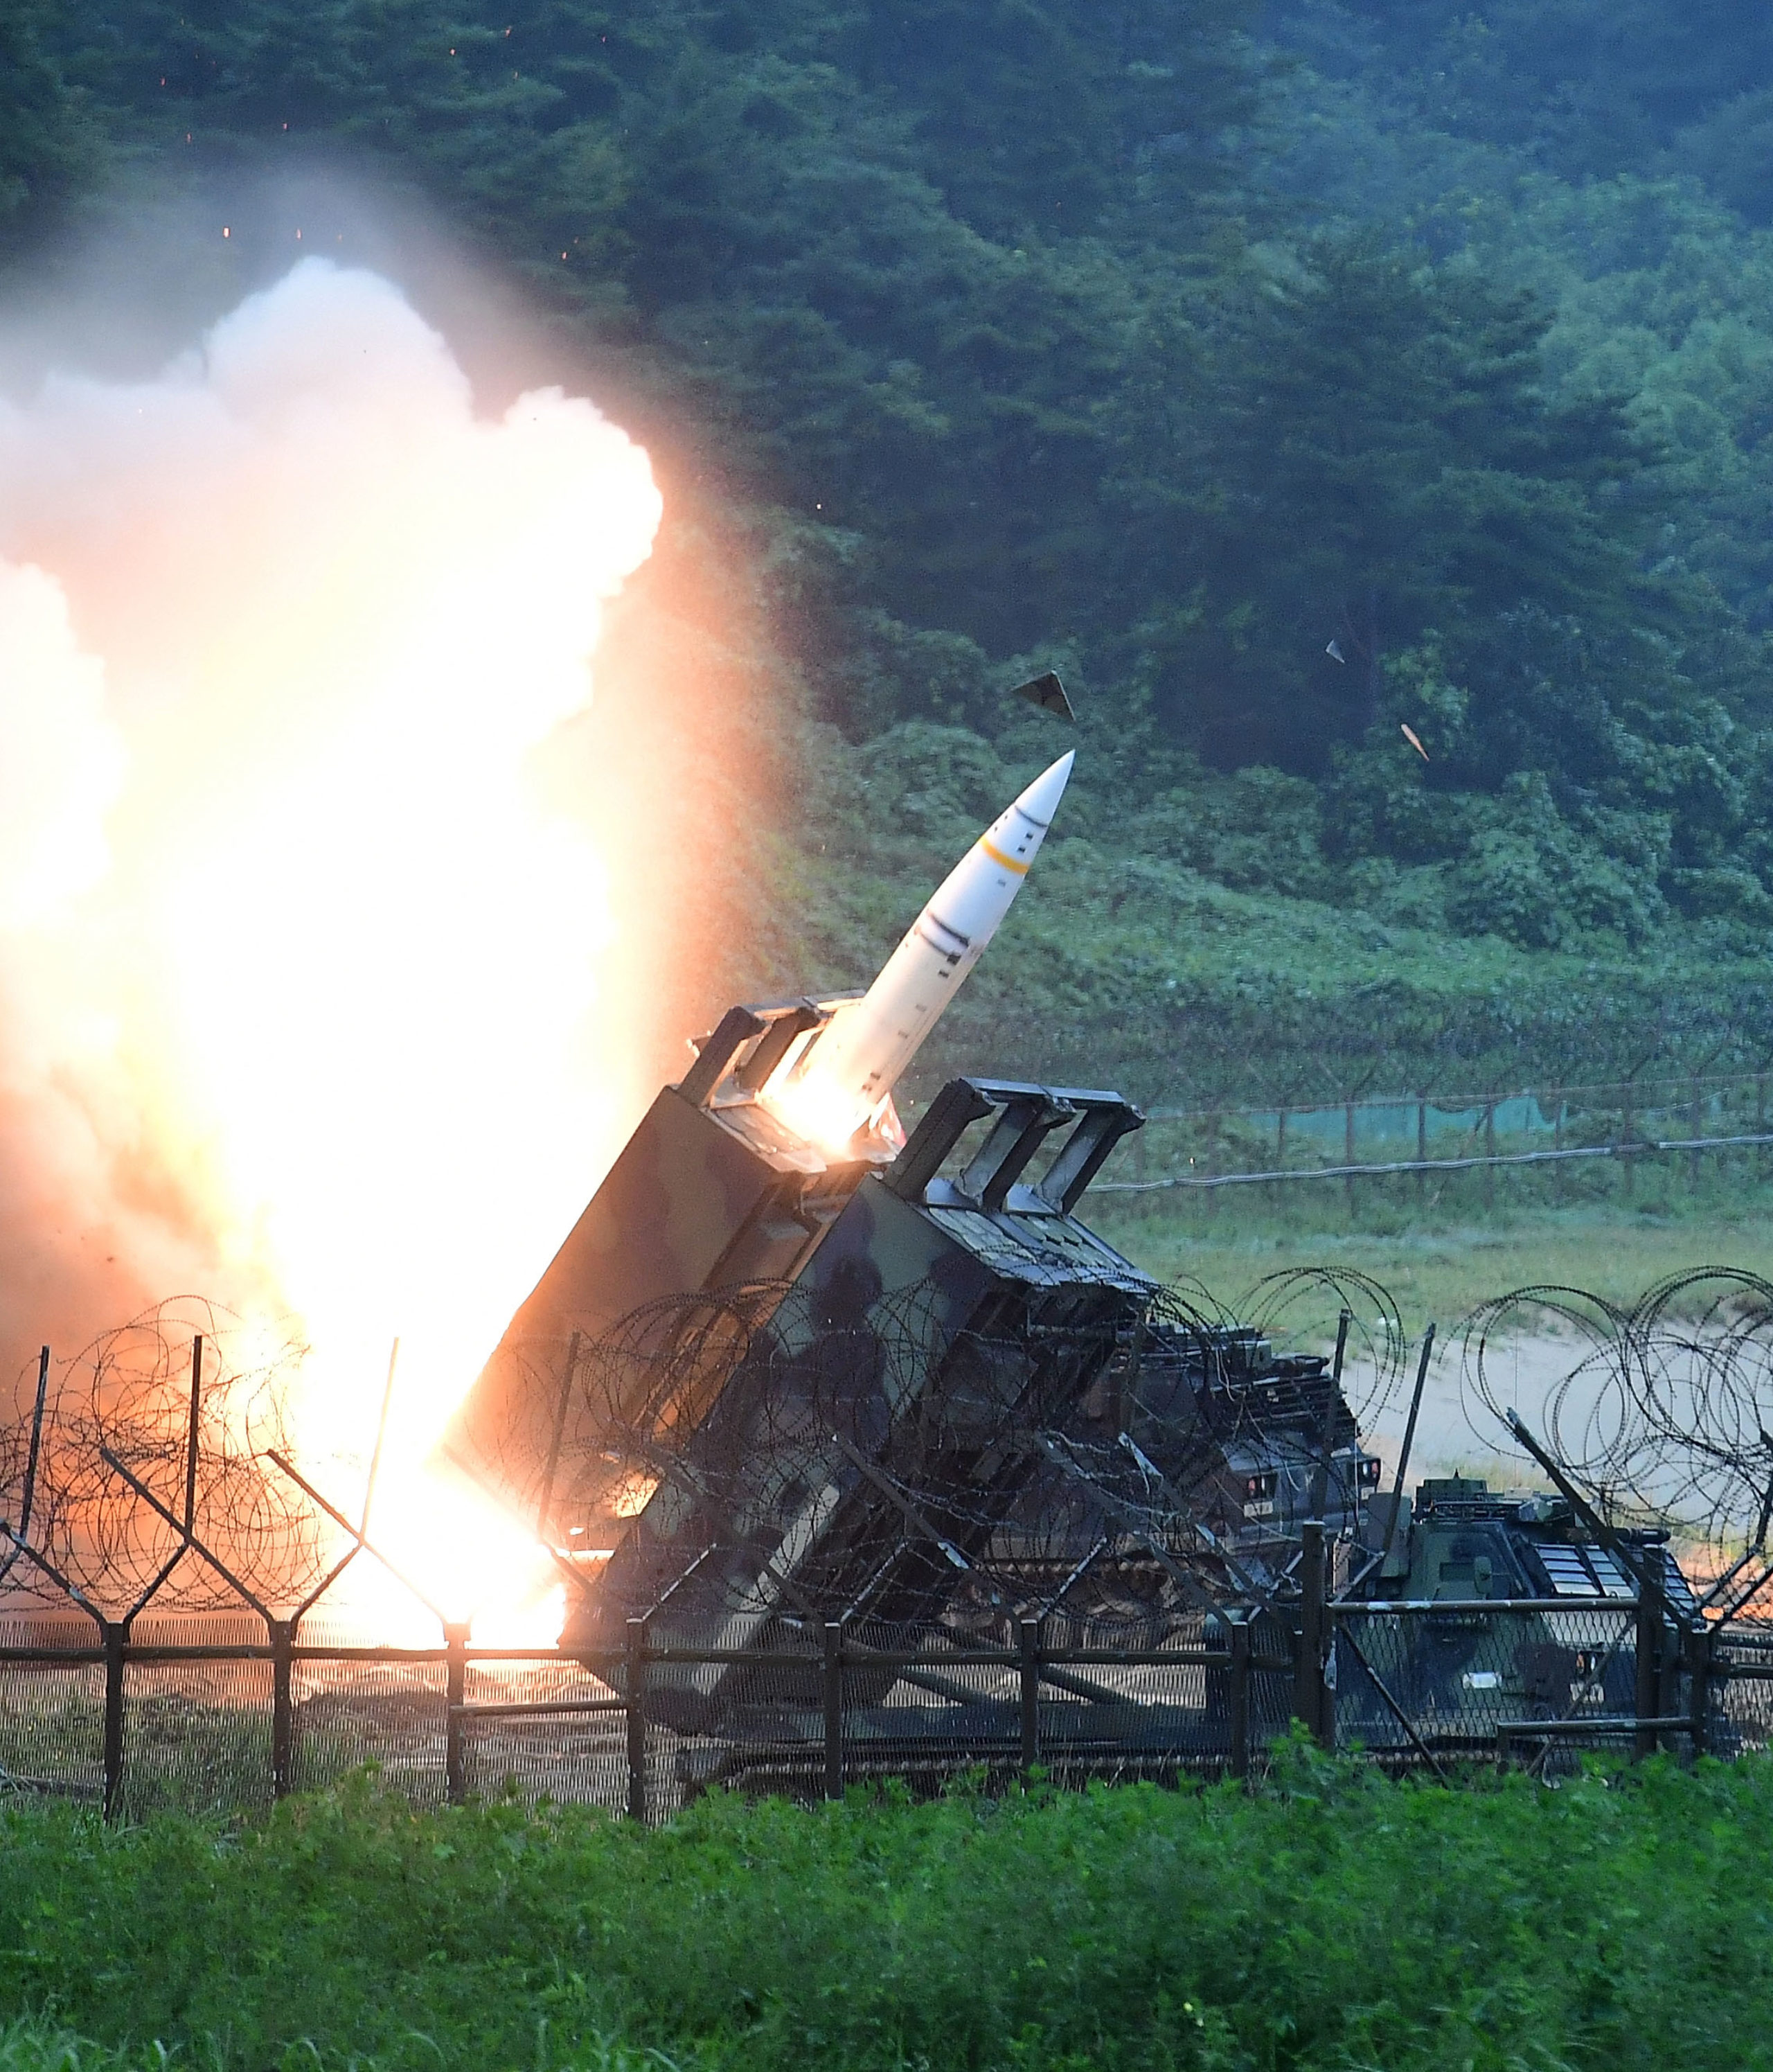 EAST COAST, SOUTH KOREA - JULY 29: In this handout photo released by the South Korean Defense Ministry, U.S. Army Tactical Missile System (ATACMS) firing a missile into the East Sea during a South Korea-U.S. joint missile drill aimed to counter North Korea¡¯s ICBM test on July 29, 2017 in East Coast, South Korea.